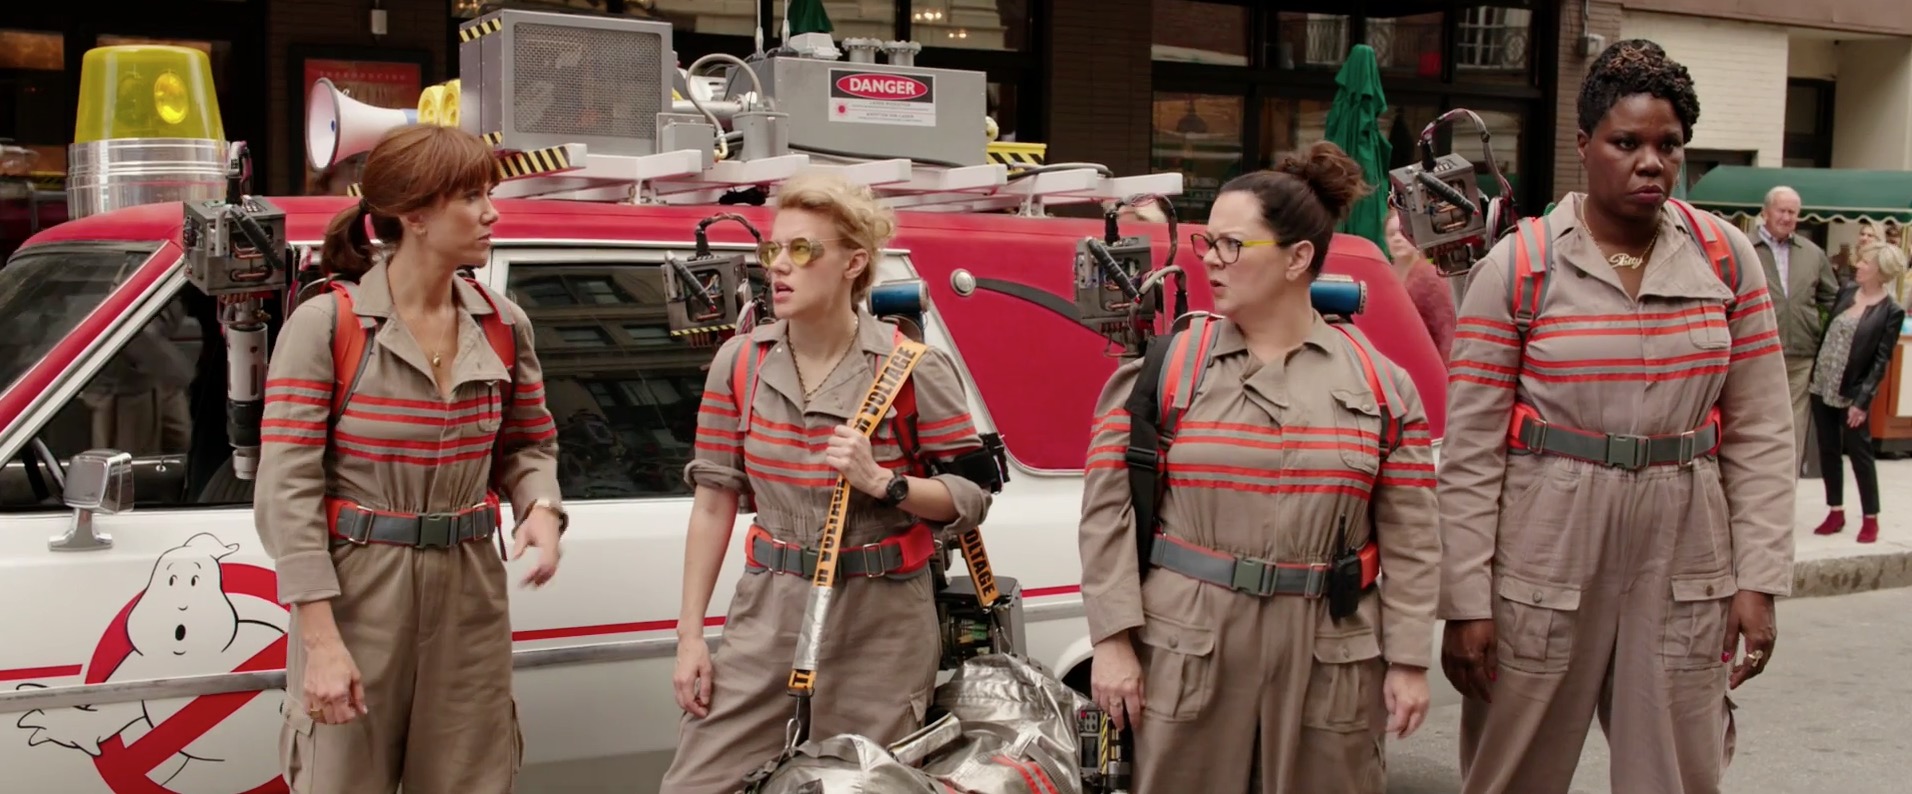 New 'Ghostbusters' Trailer Is Finally Here! RTM RightThisMinute